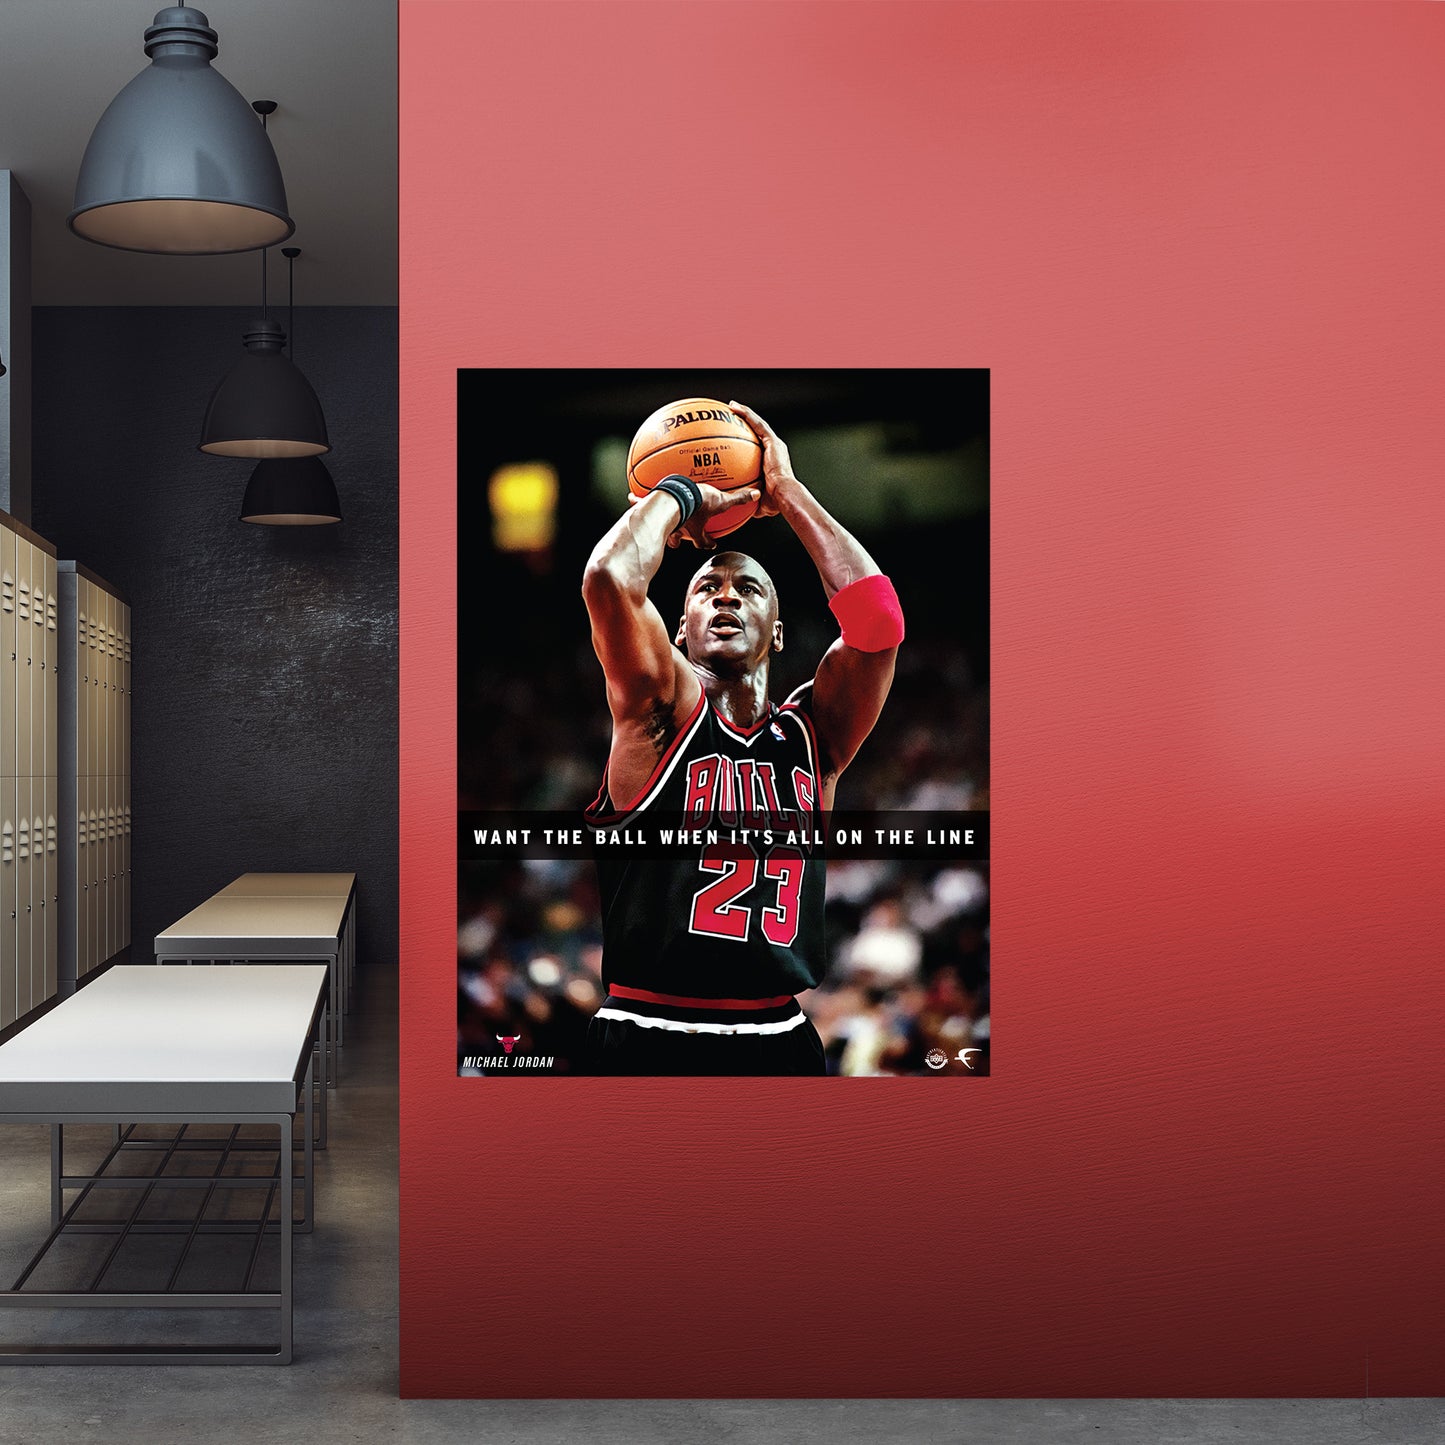 Chicago Bulls: Michael Jordan  Shot Motivational Poster        - Officially Licensed NBA Removable     Adhesive Decal